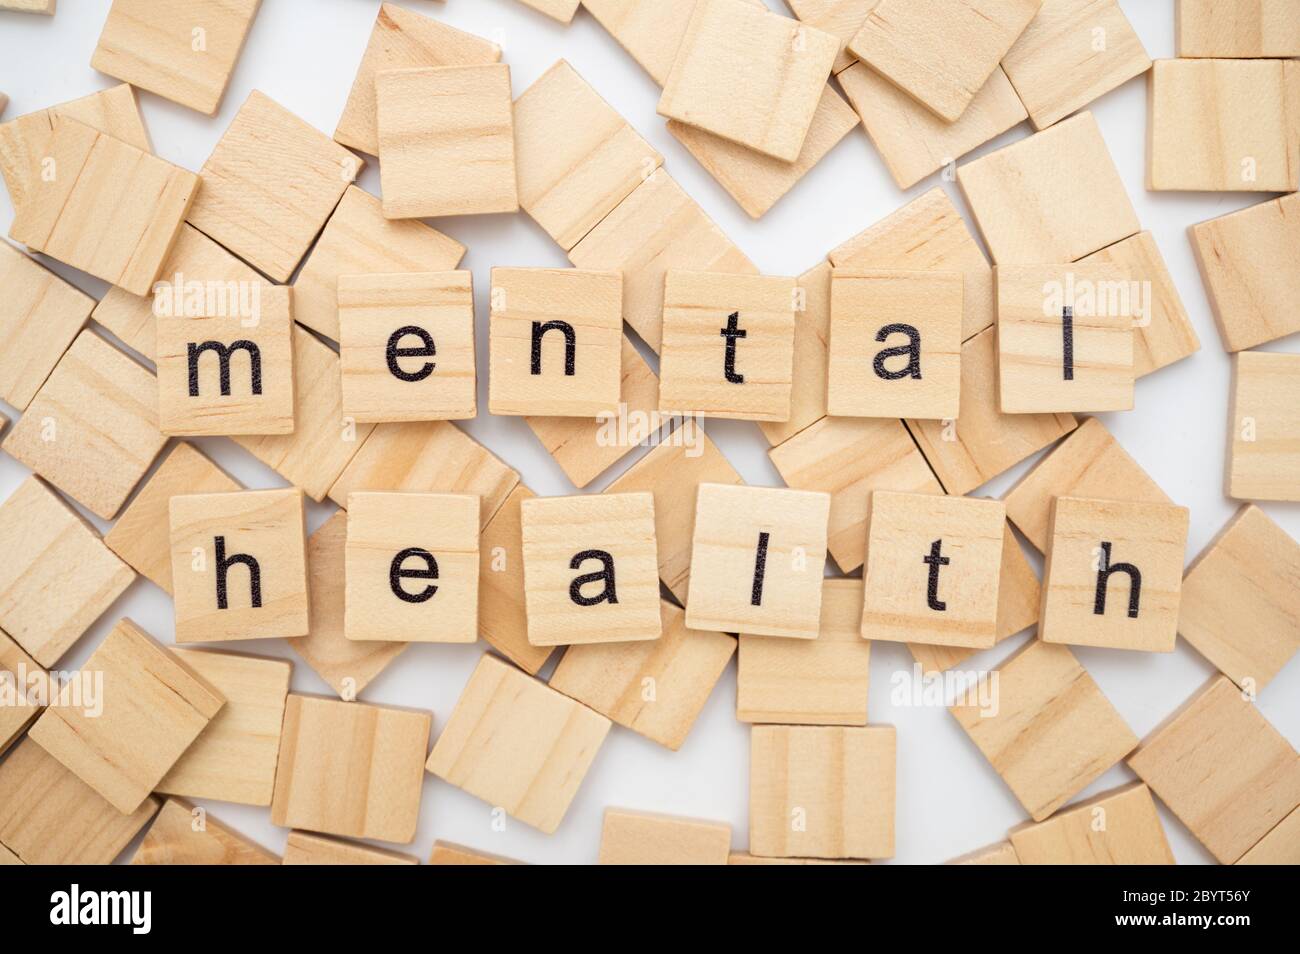 Generic wooden scrabble tiles isolated on white background spelling the word MENTAL HEALTH Stock Photo